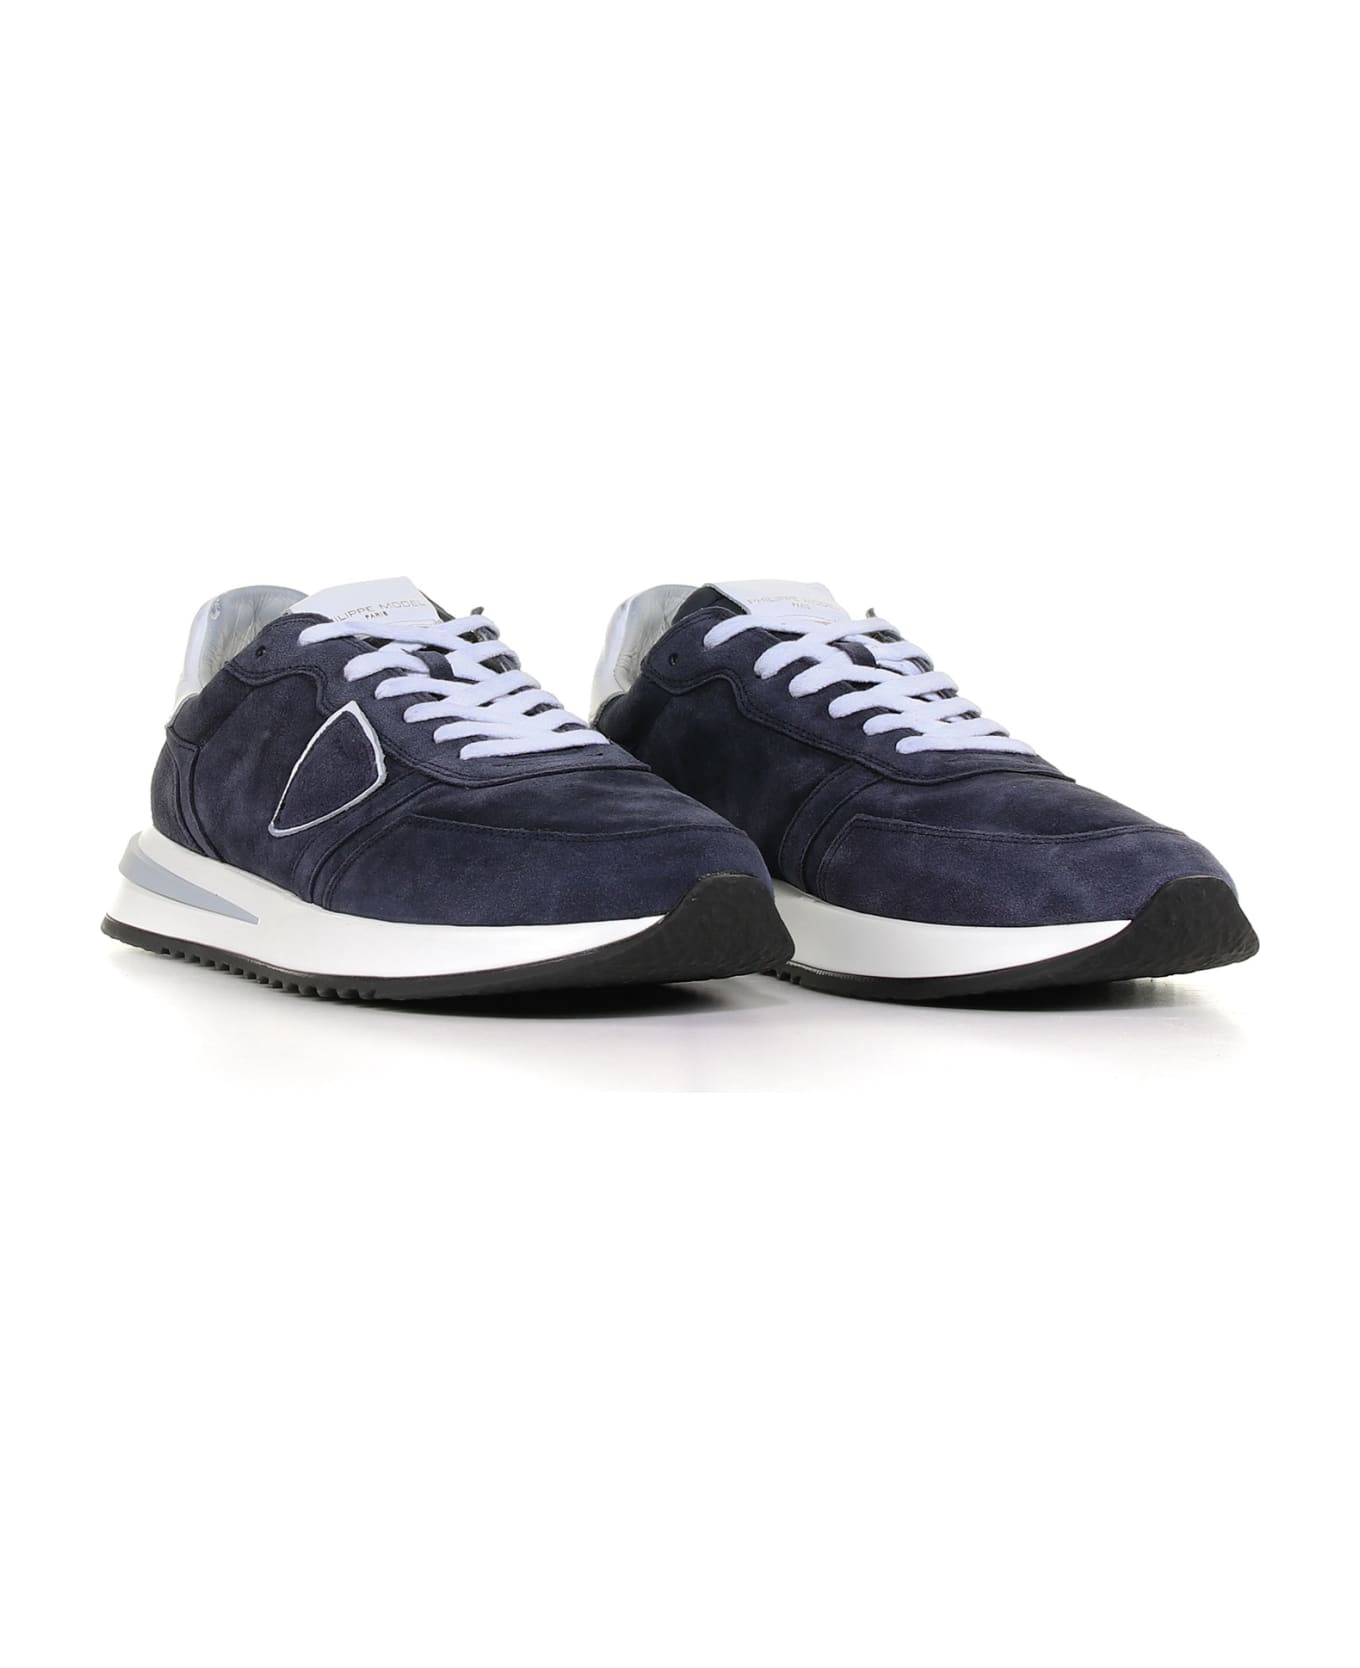 Philippe Model Tropez 2.1 Sneaker In Suede With Leather Details - Blu スニーカー